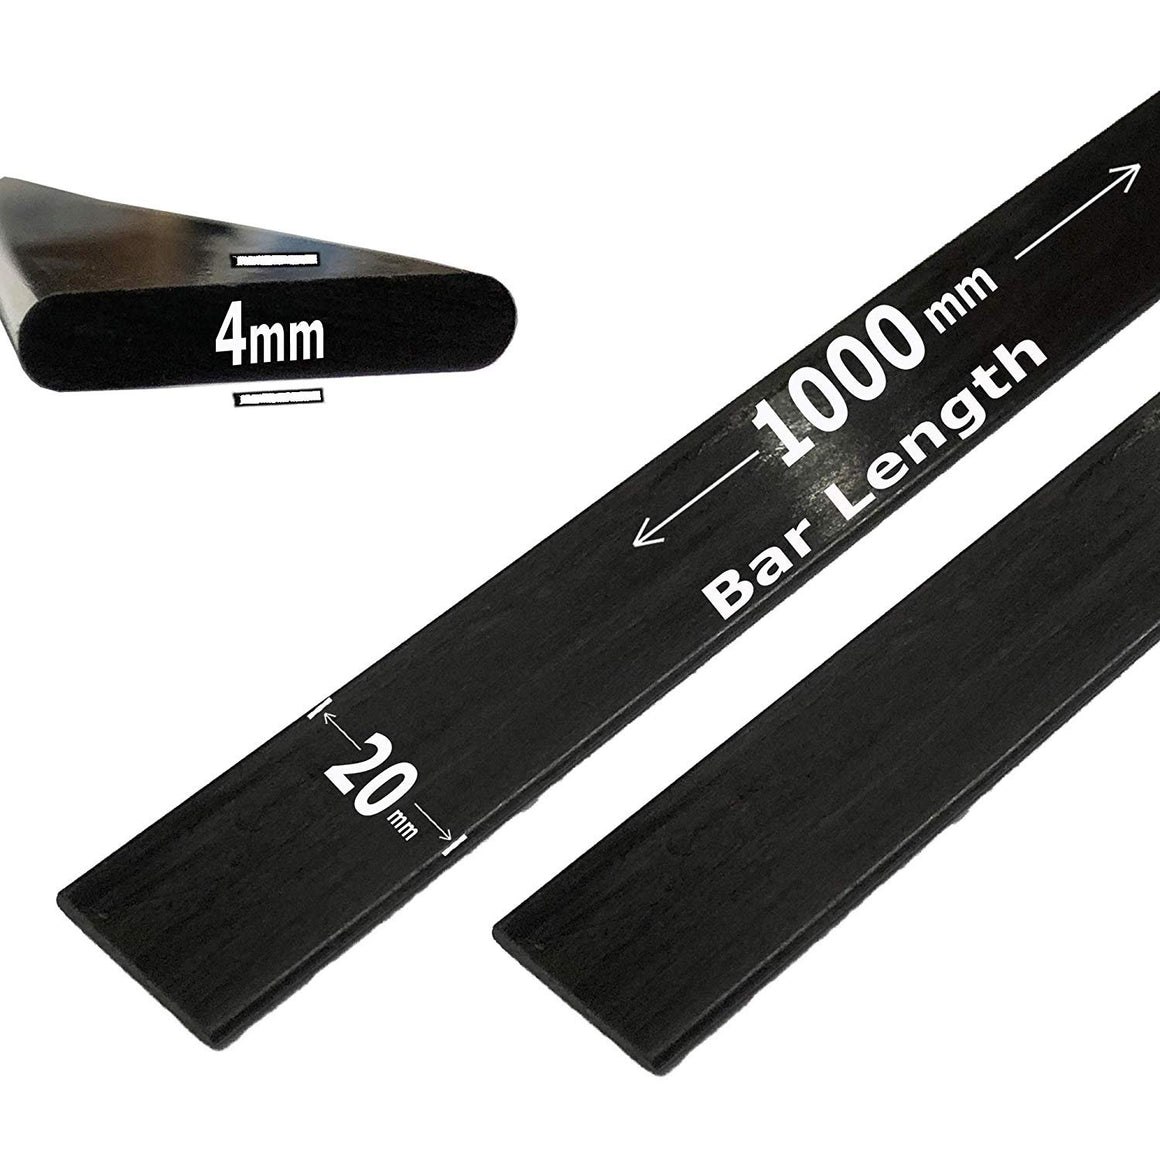 (4) 4mm x 20mm 1000mm - PULTRUDED-Flat Carbon Fiber Bar. 100% Pultruded high Strength Carbon Fiber. Used for Drones, Radio Controlled Vehicles. Projects requiring high Strength Components